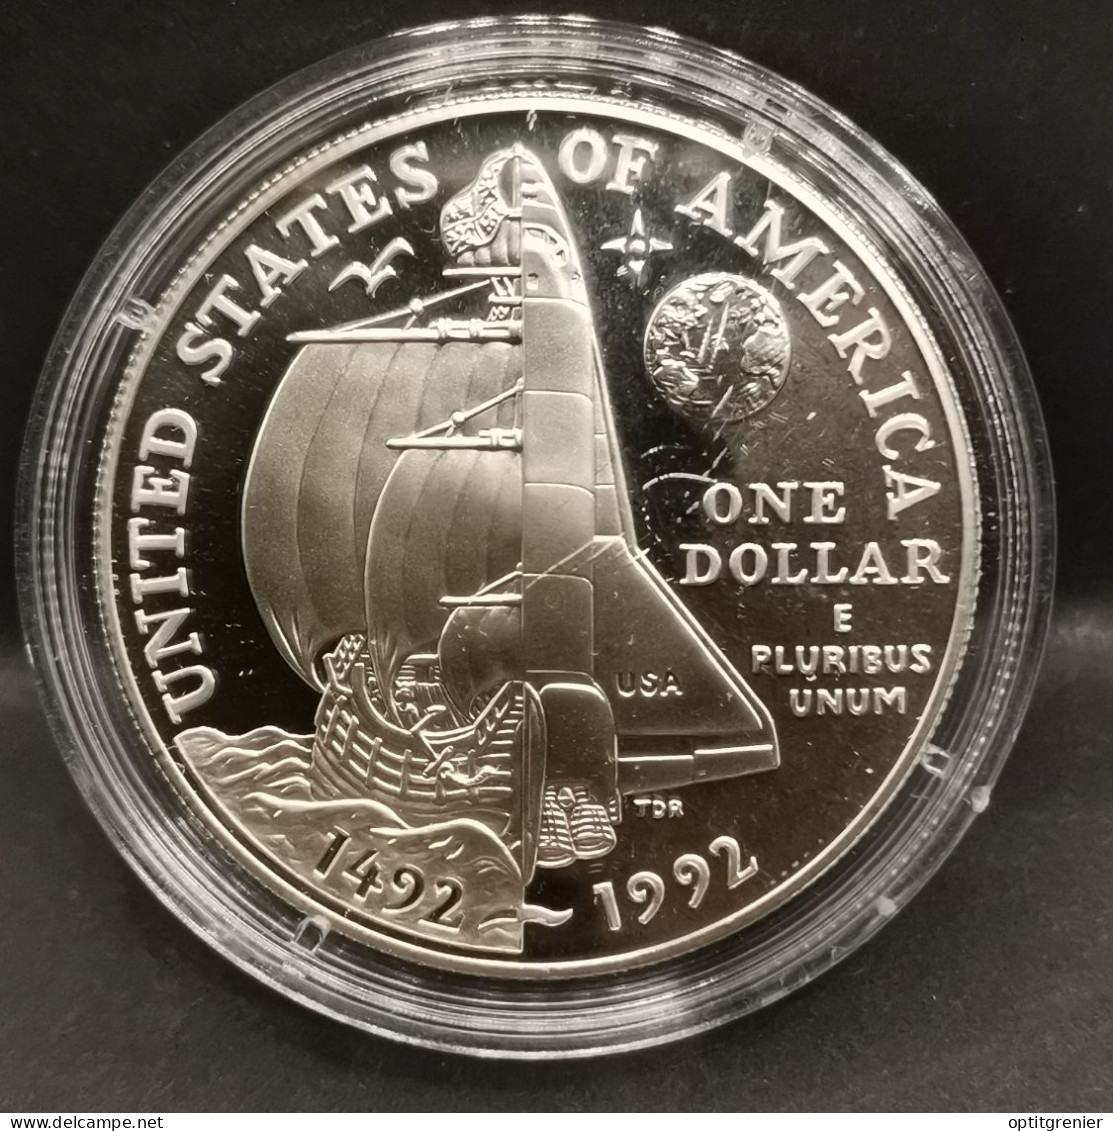 1 DOLLAR BE ARGENT 1992 P CHRISTOPHE COLOMB USA / PROOF SILVER - Unclassified